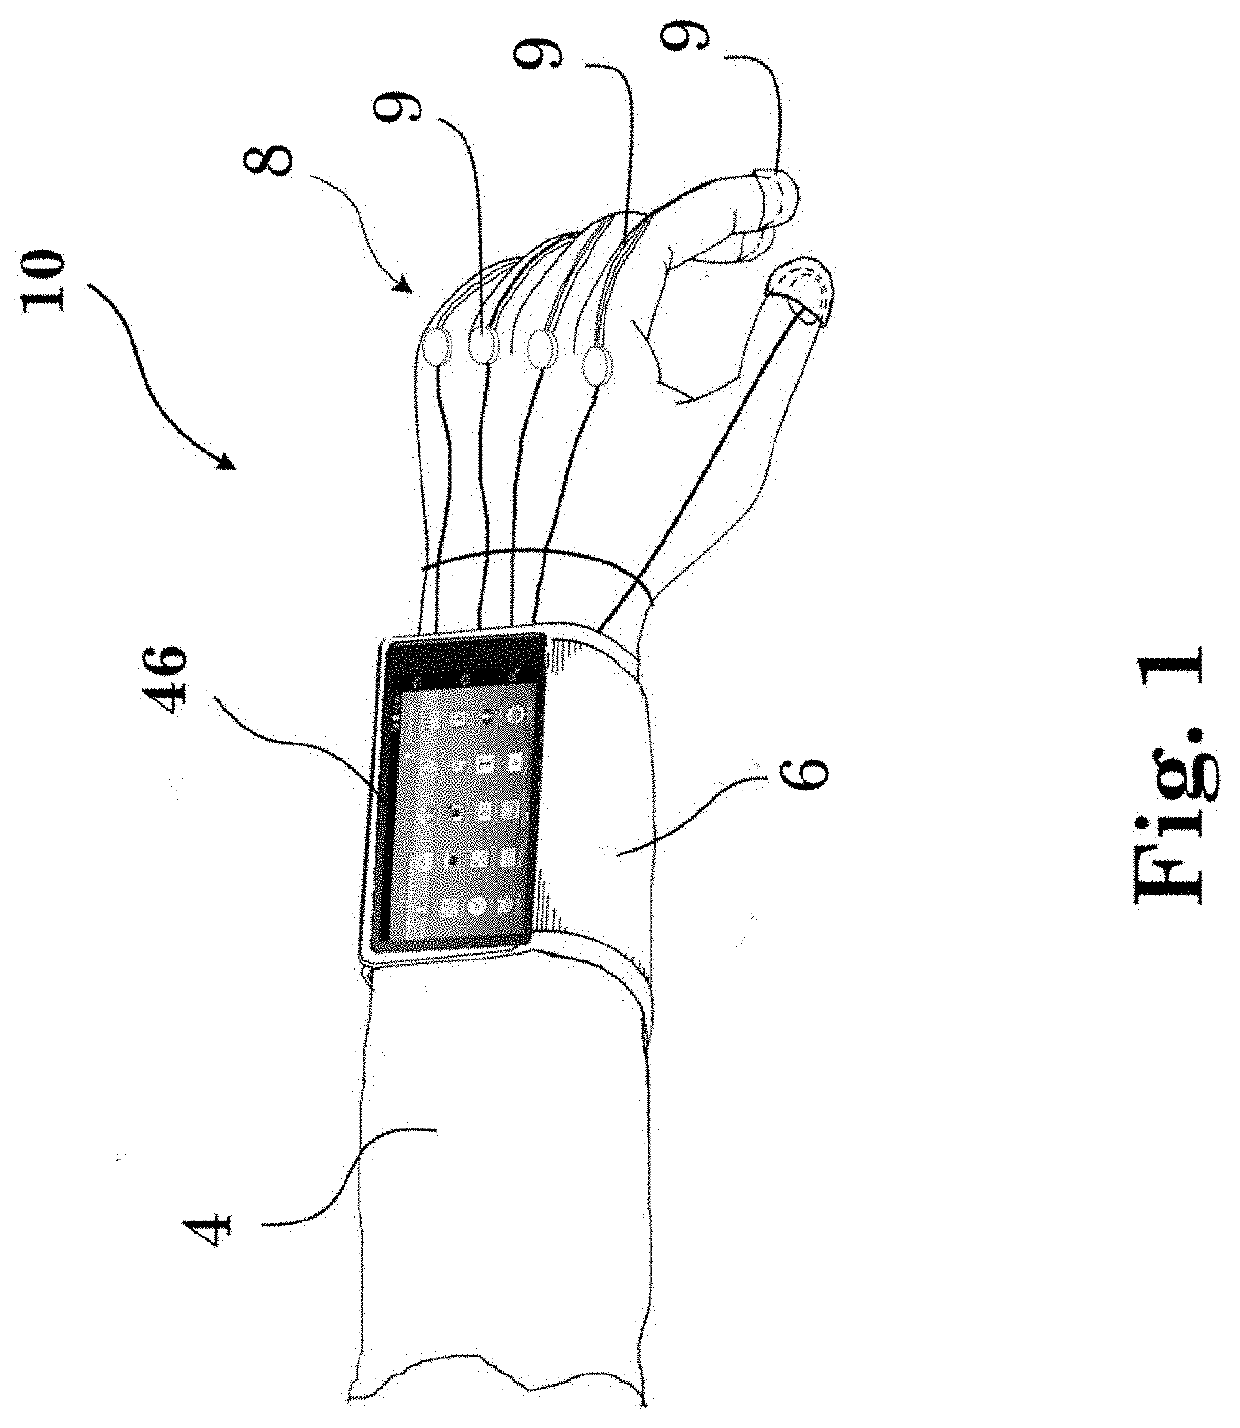 Wearable Apparatus with Universal Wireless Controller and Monitoring Technology Comprising Pandemic Detection Feature